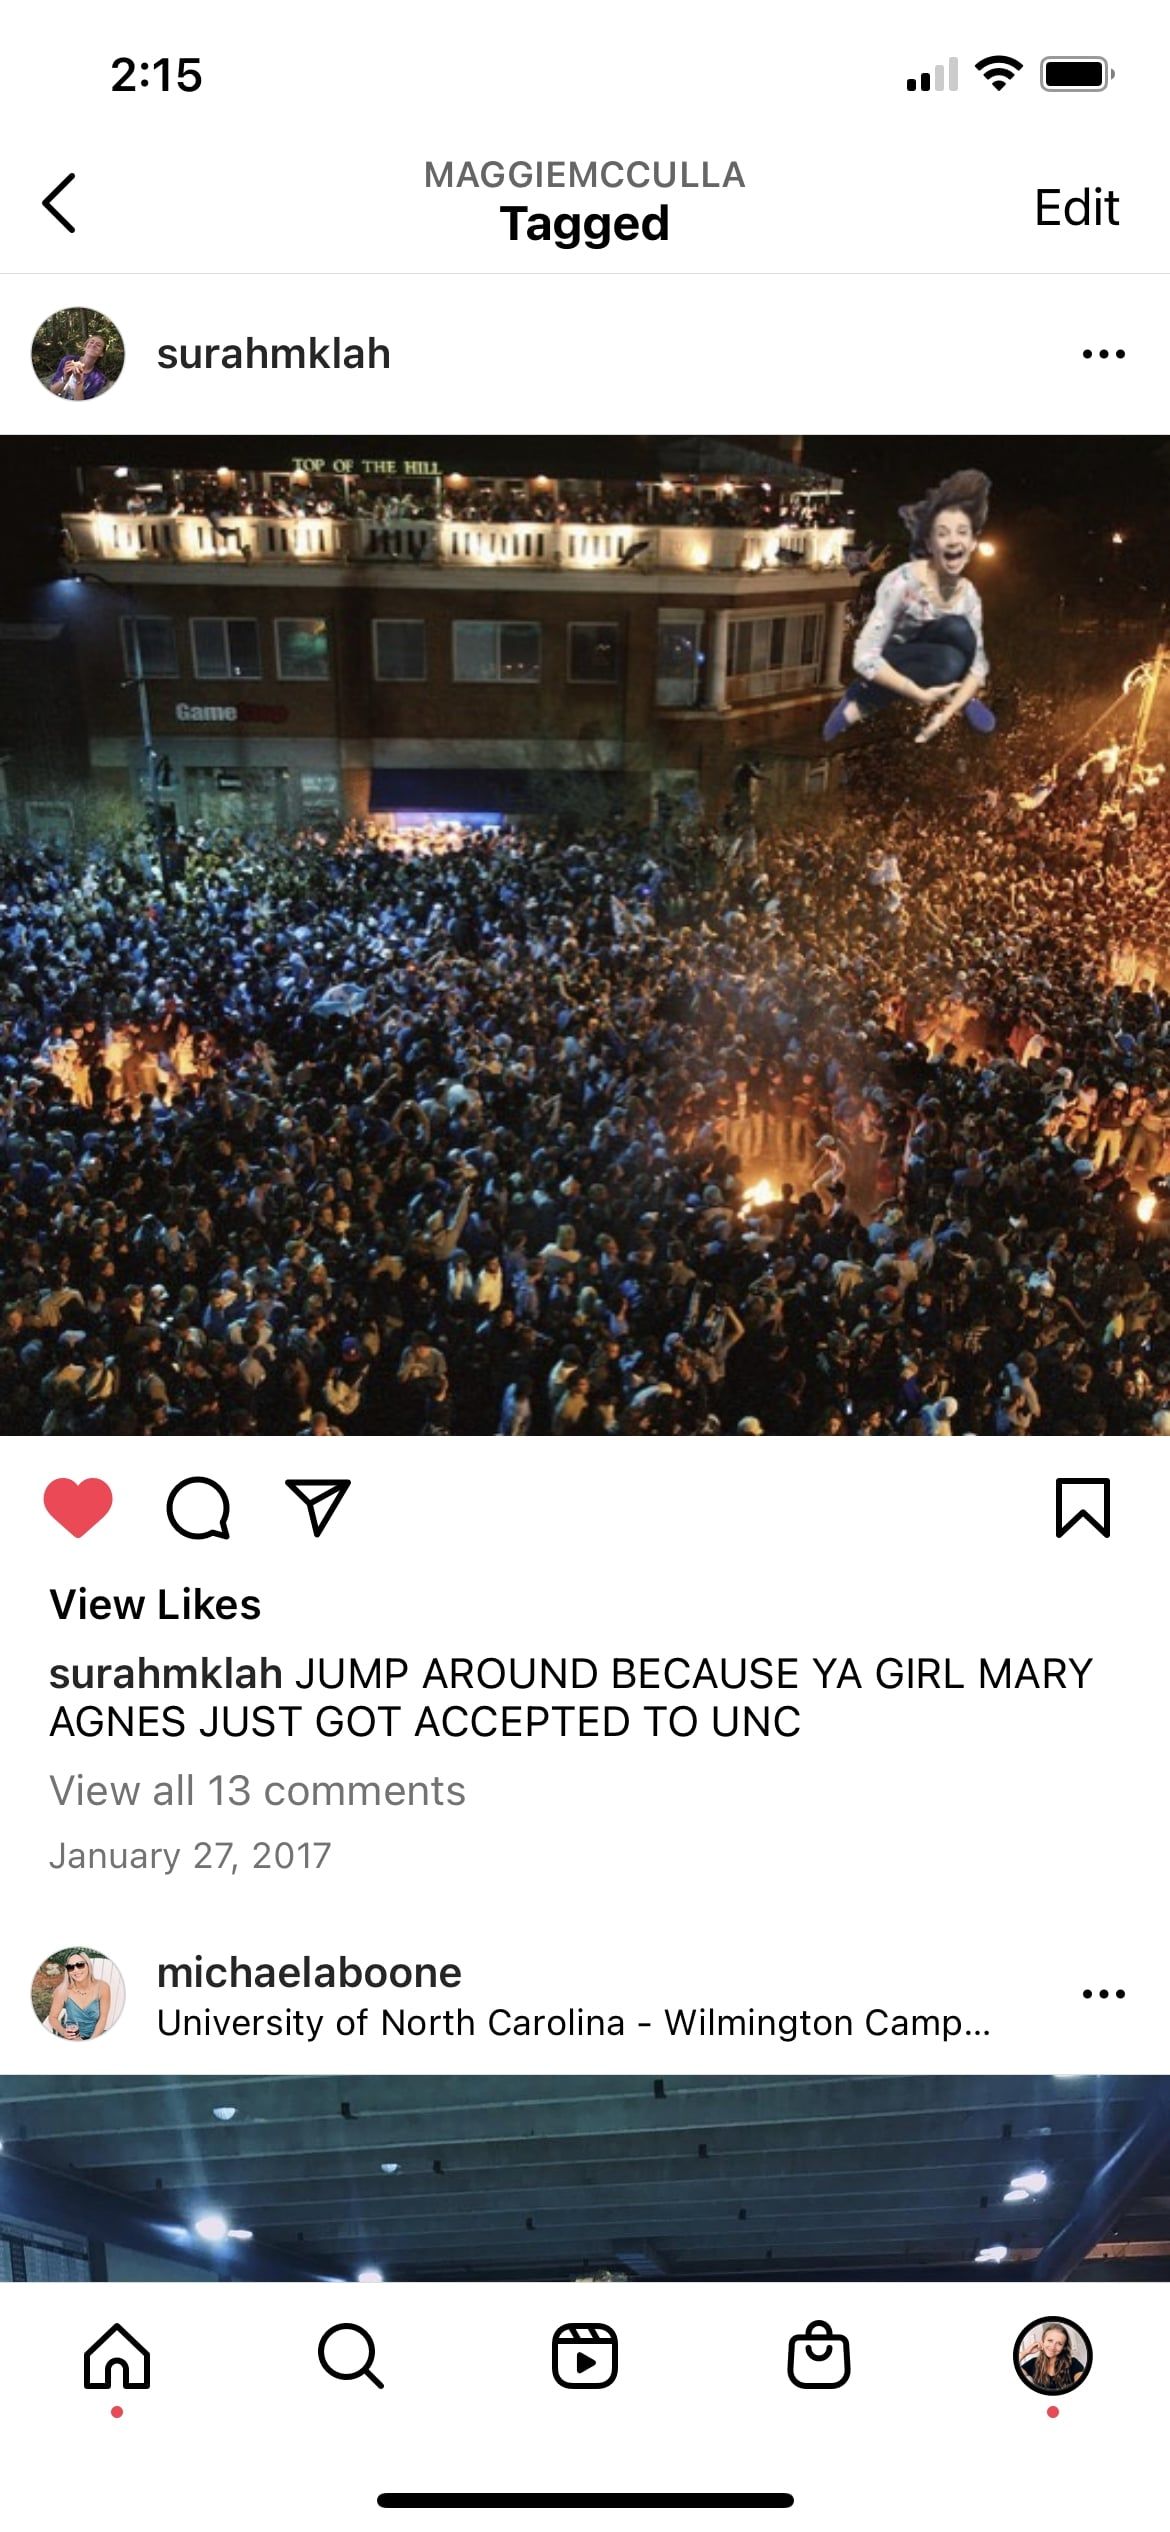 Screenshot of a photoshopped photo posted to Instagram of a girl doing a cannonball into a crowd